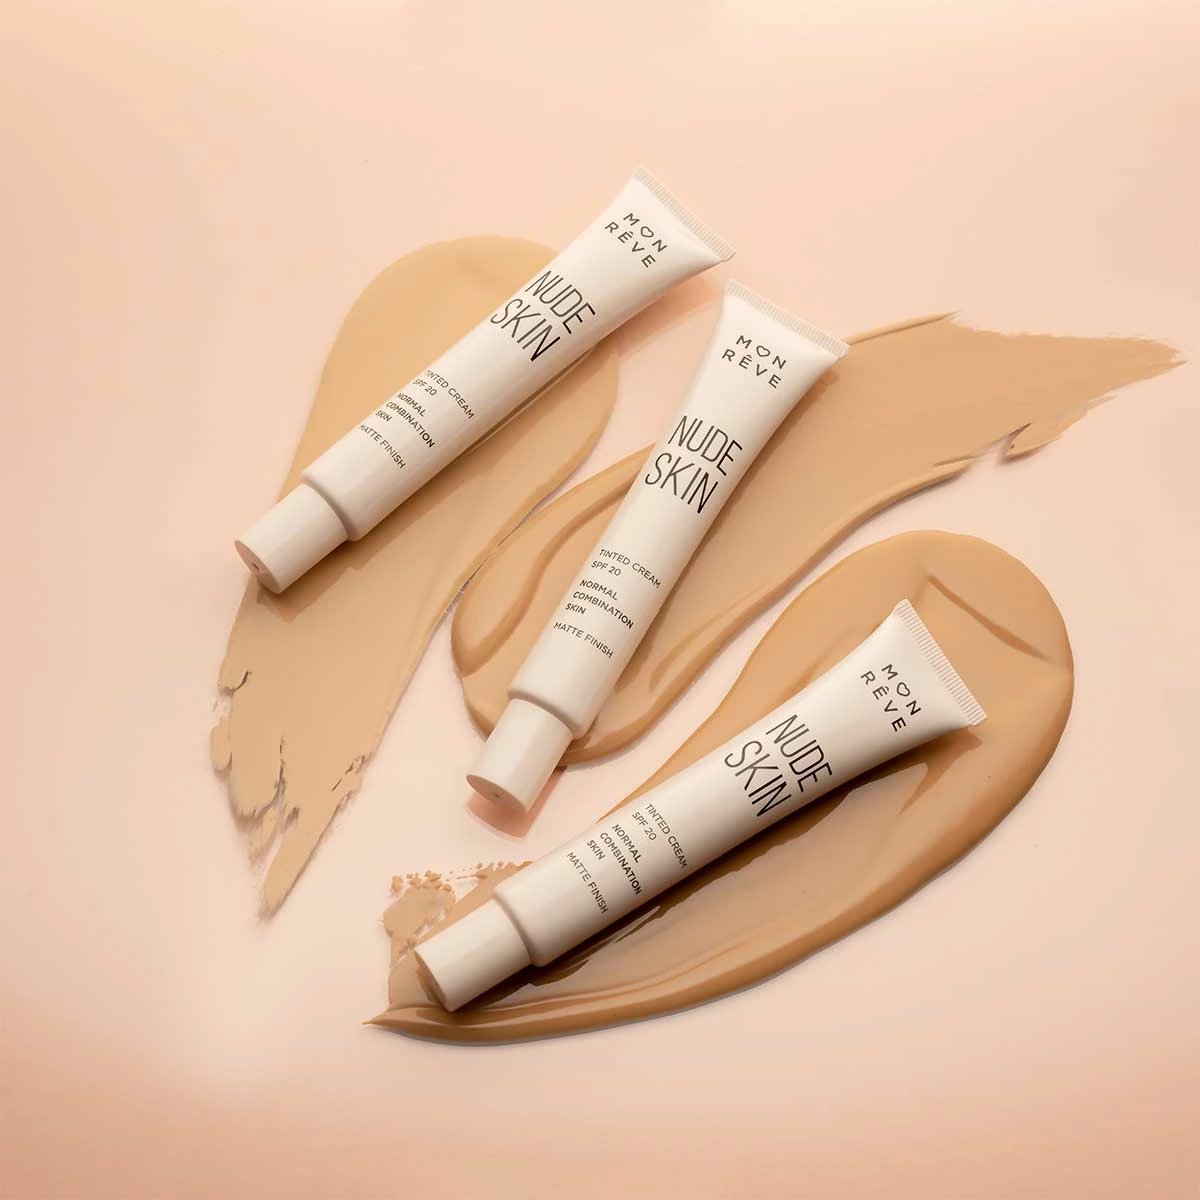 NUDE SKIN NORMAL TO COMBINATION SKIN Tinted Cream with SPF 20